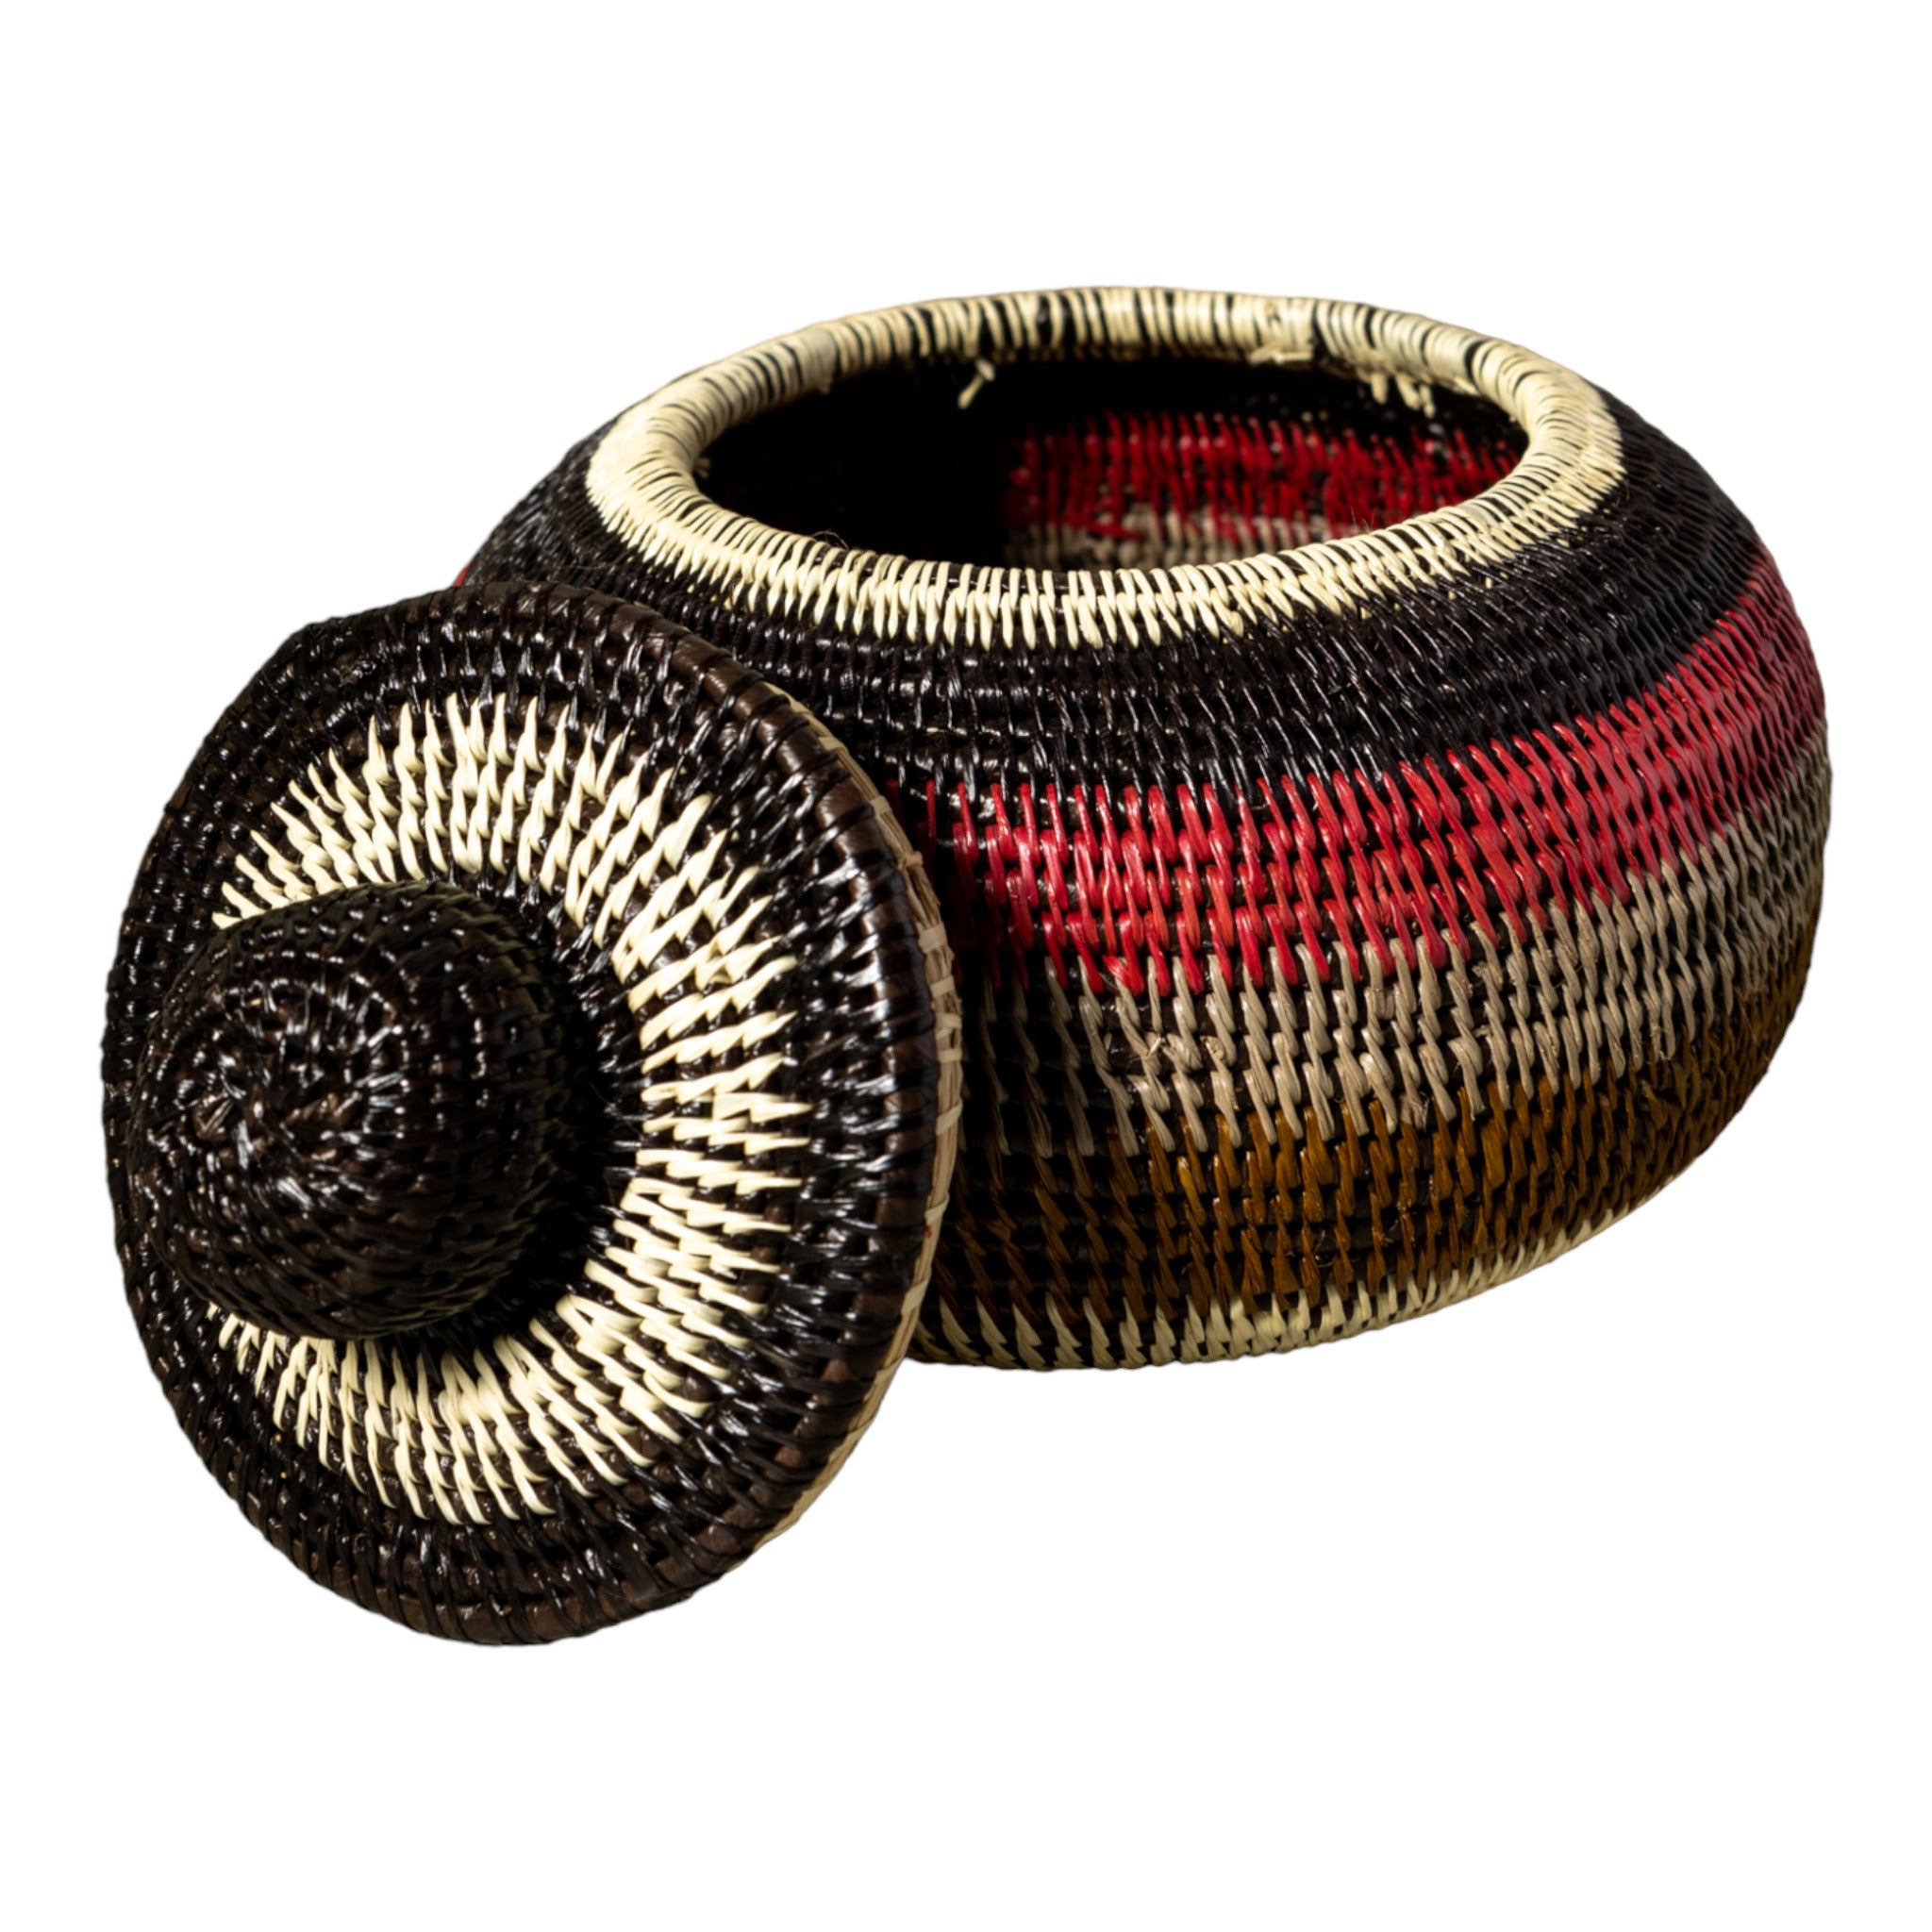 Jungle Rhythm Woven Basket With Top